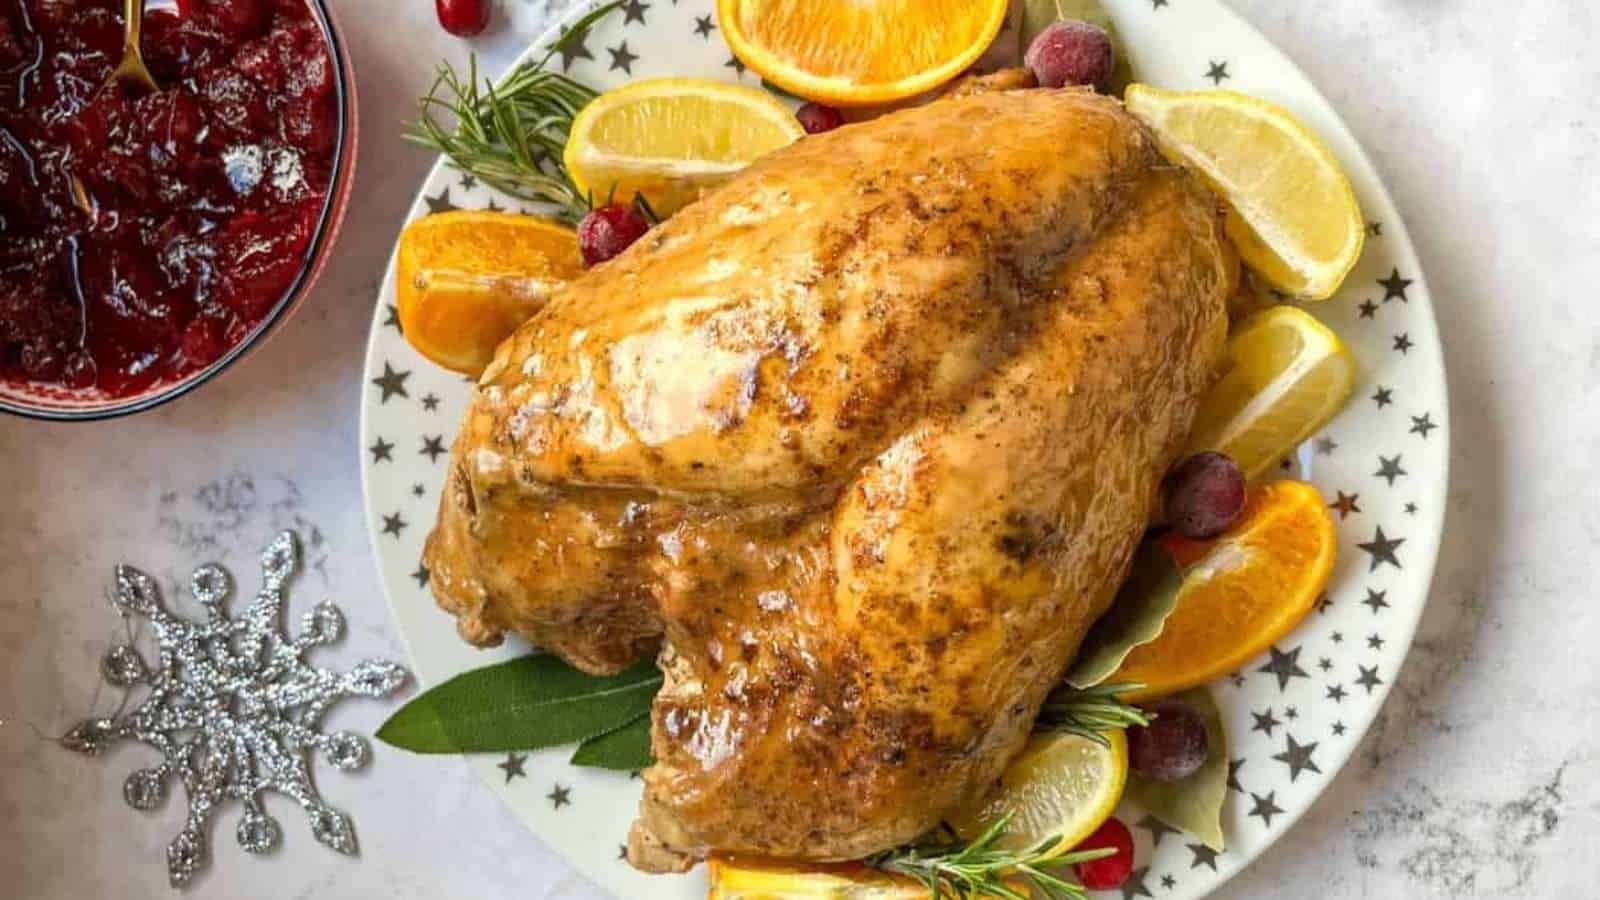 A roast turkey on a plate with oranges and cranberry sauce.